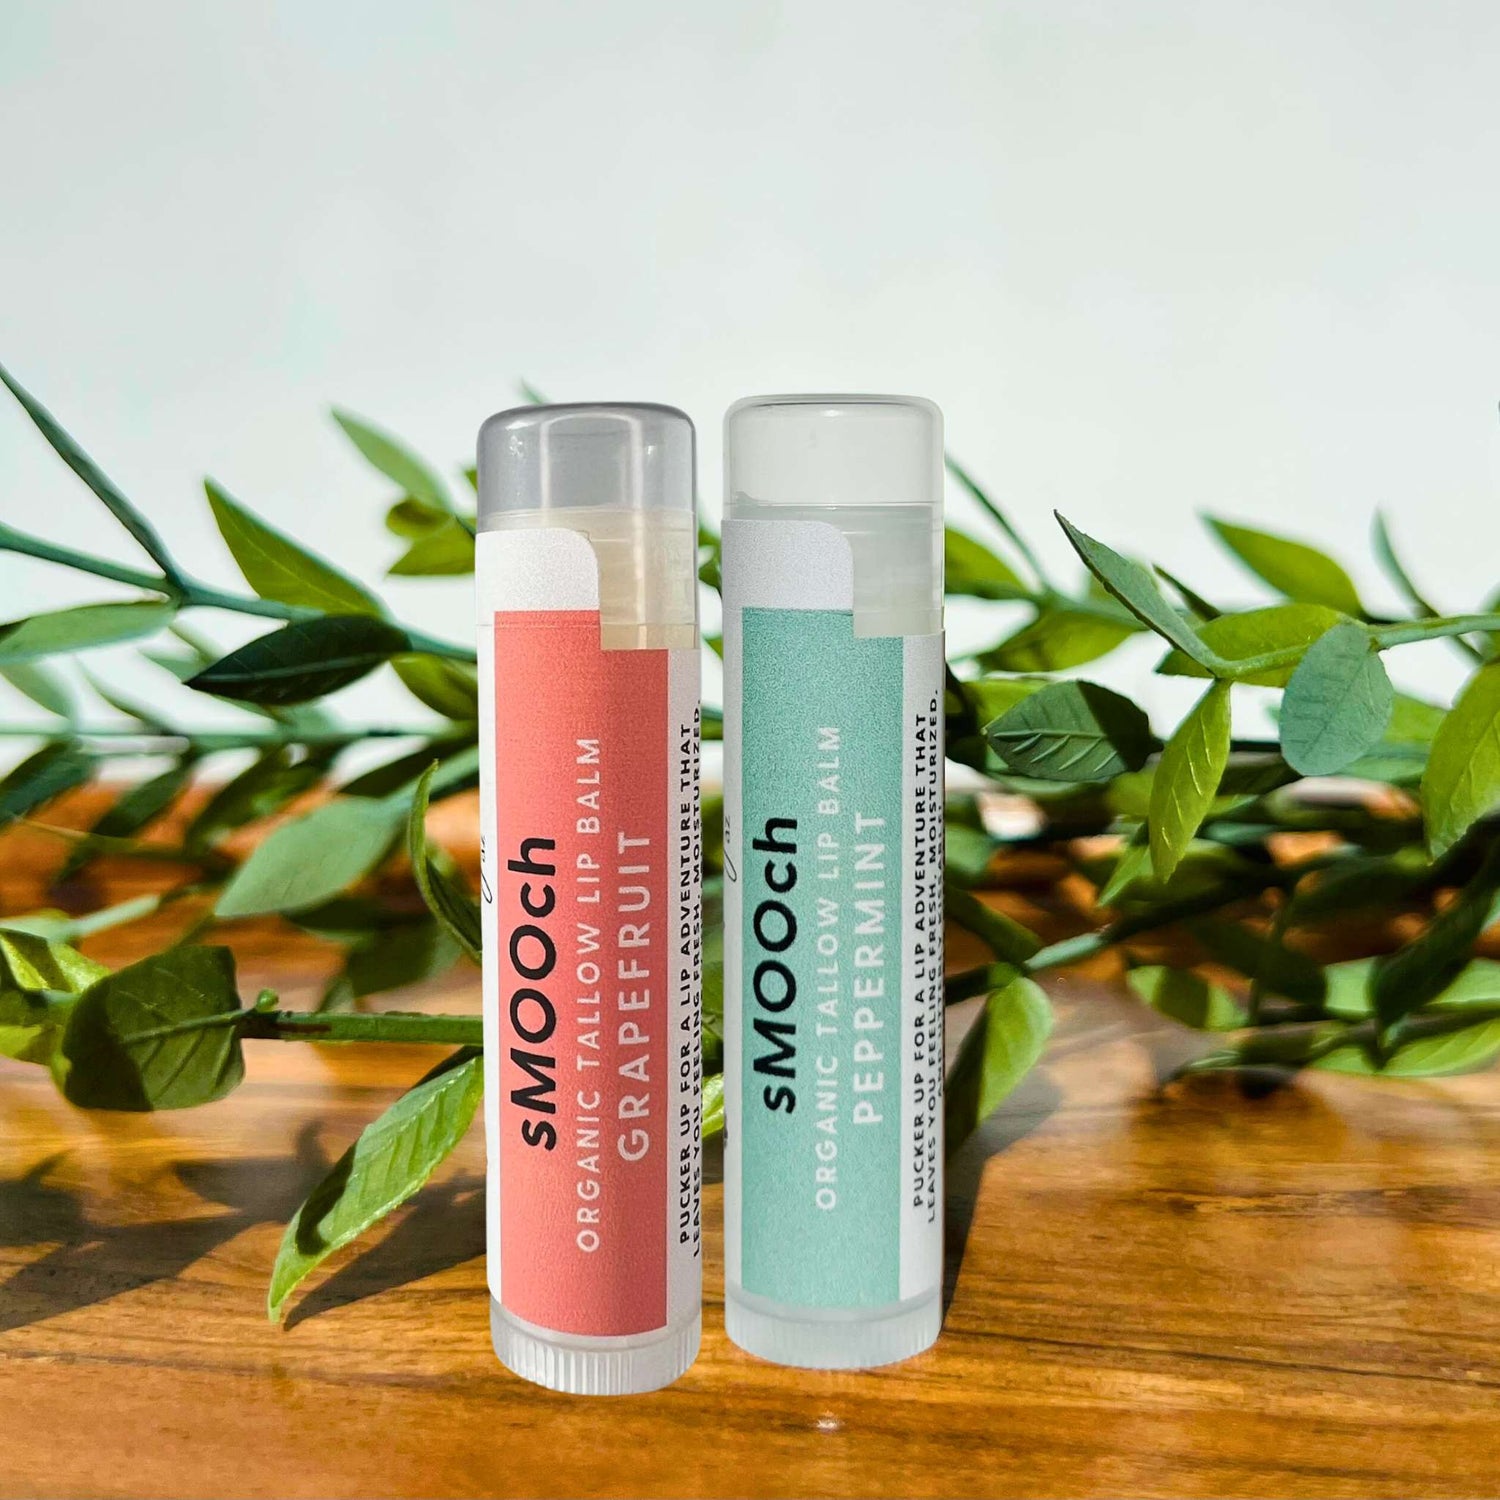 sMOOch peppermint and grapefruit with greenery